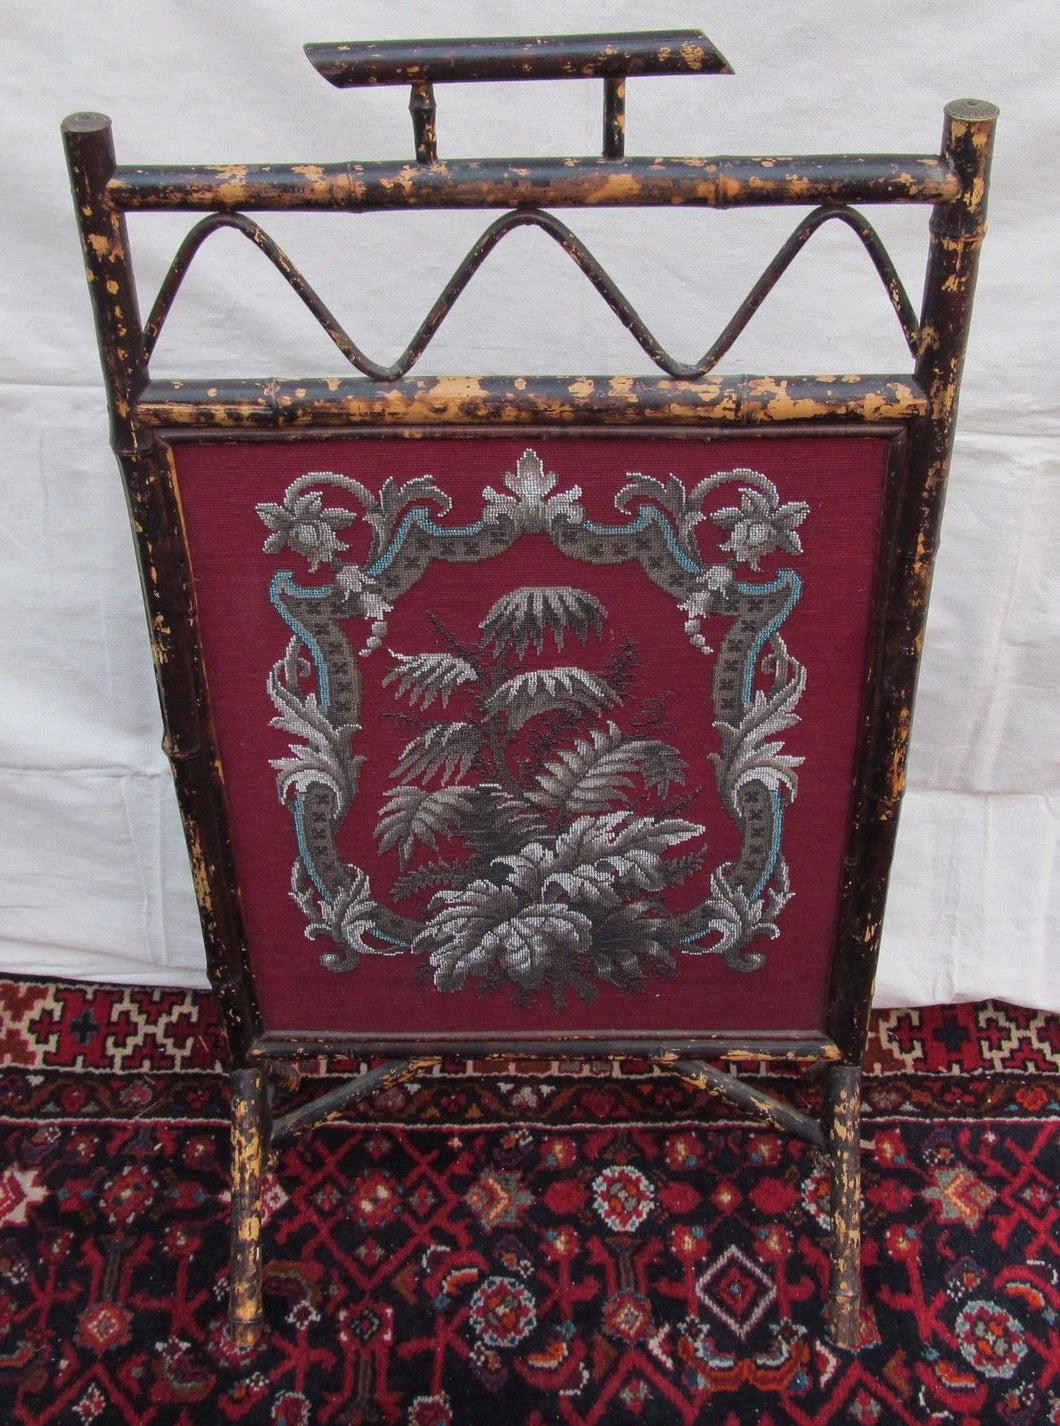 BEAUTIFUL VICTORIAN BAMBOO FIRESCREEN WITH FLORAL GLASS BEAD WORK DECORATION